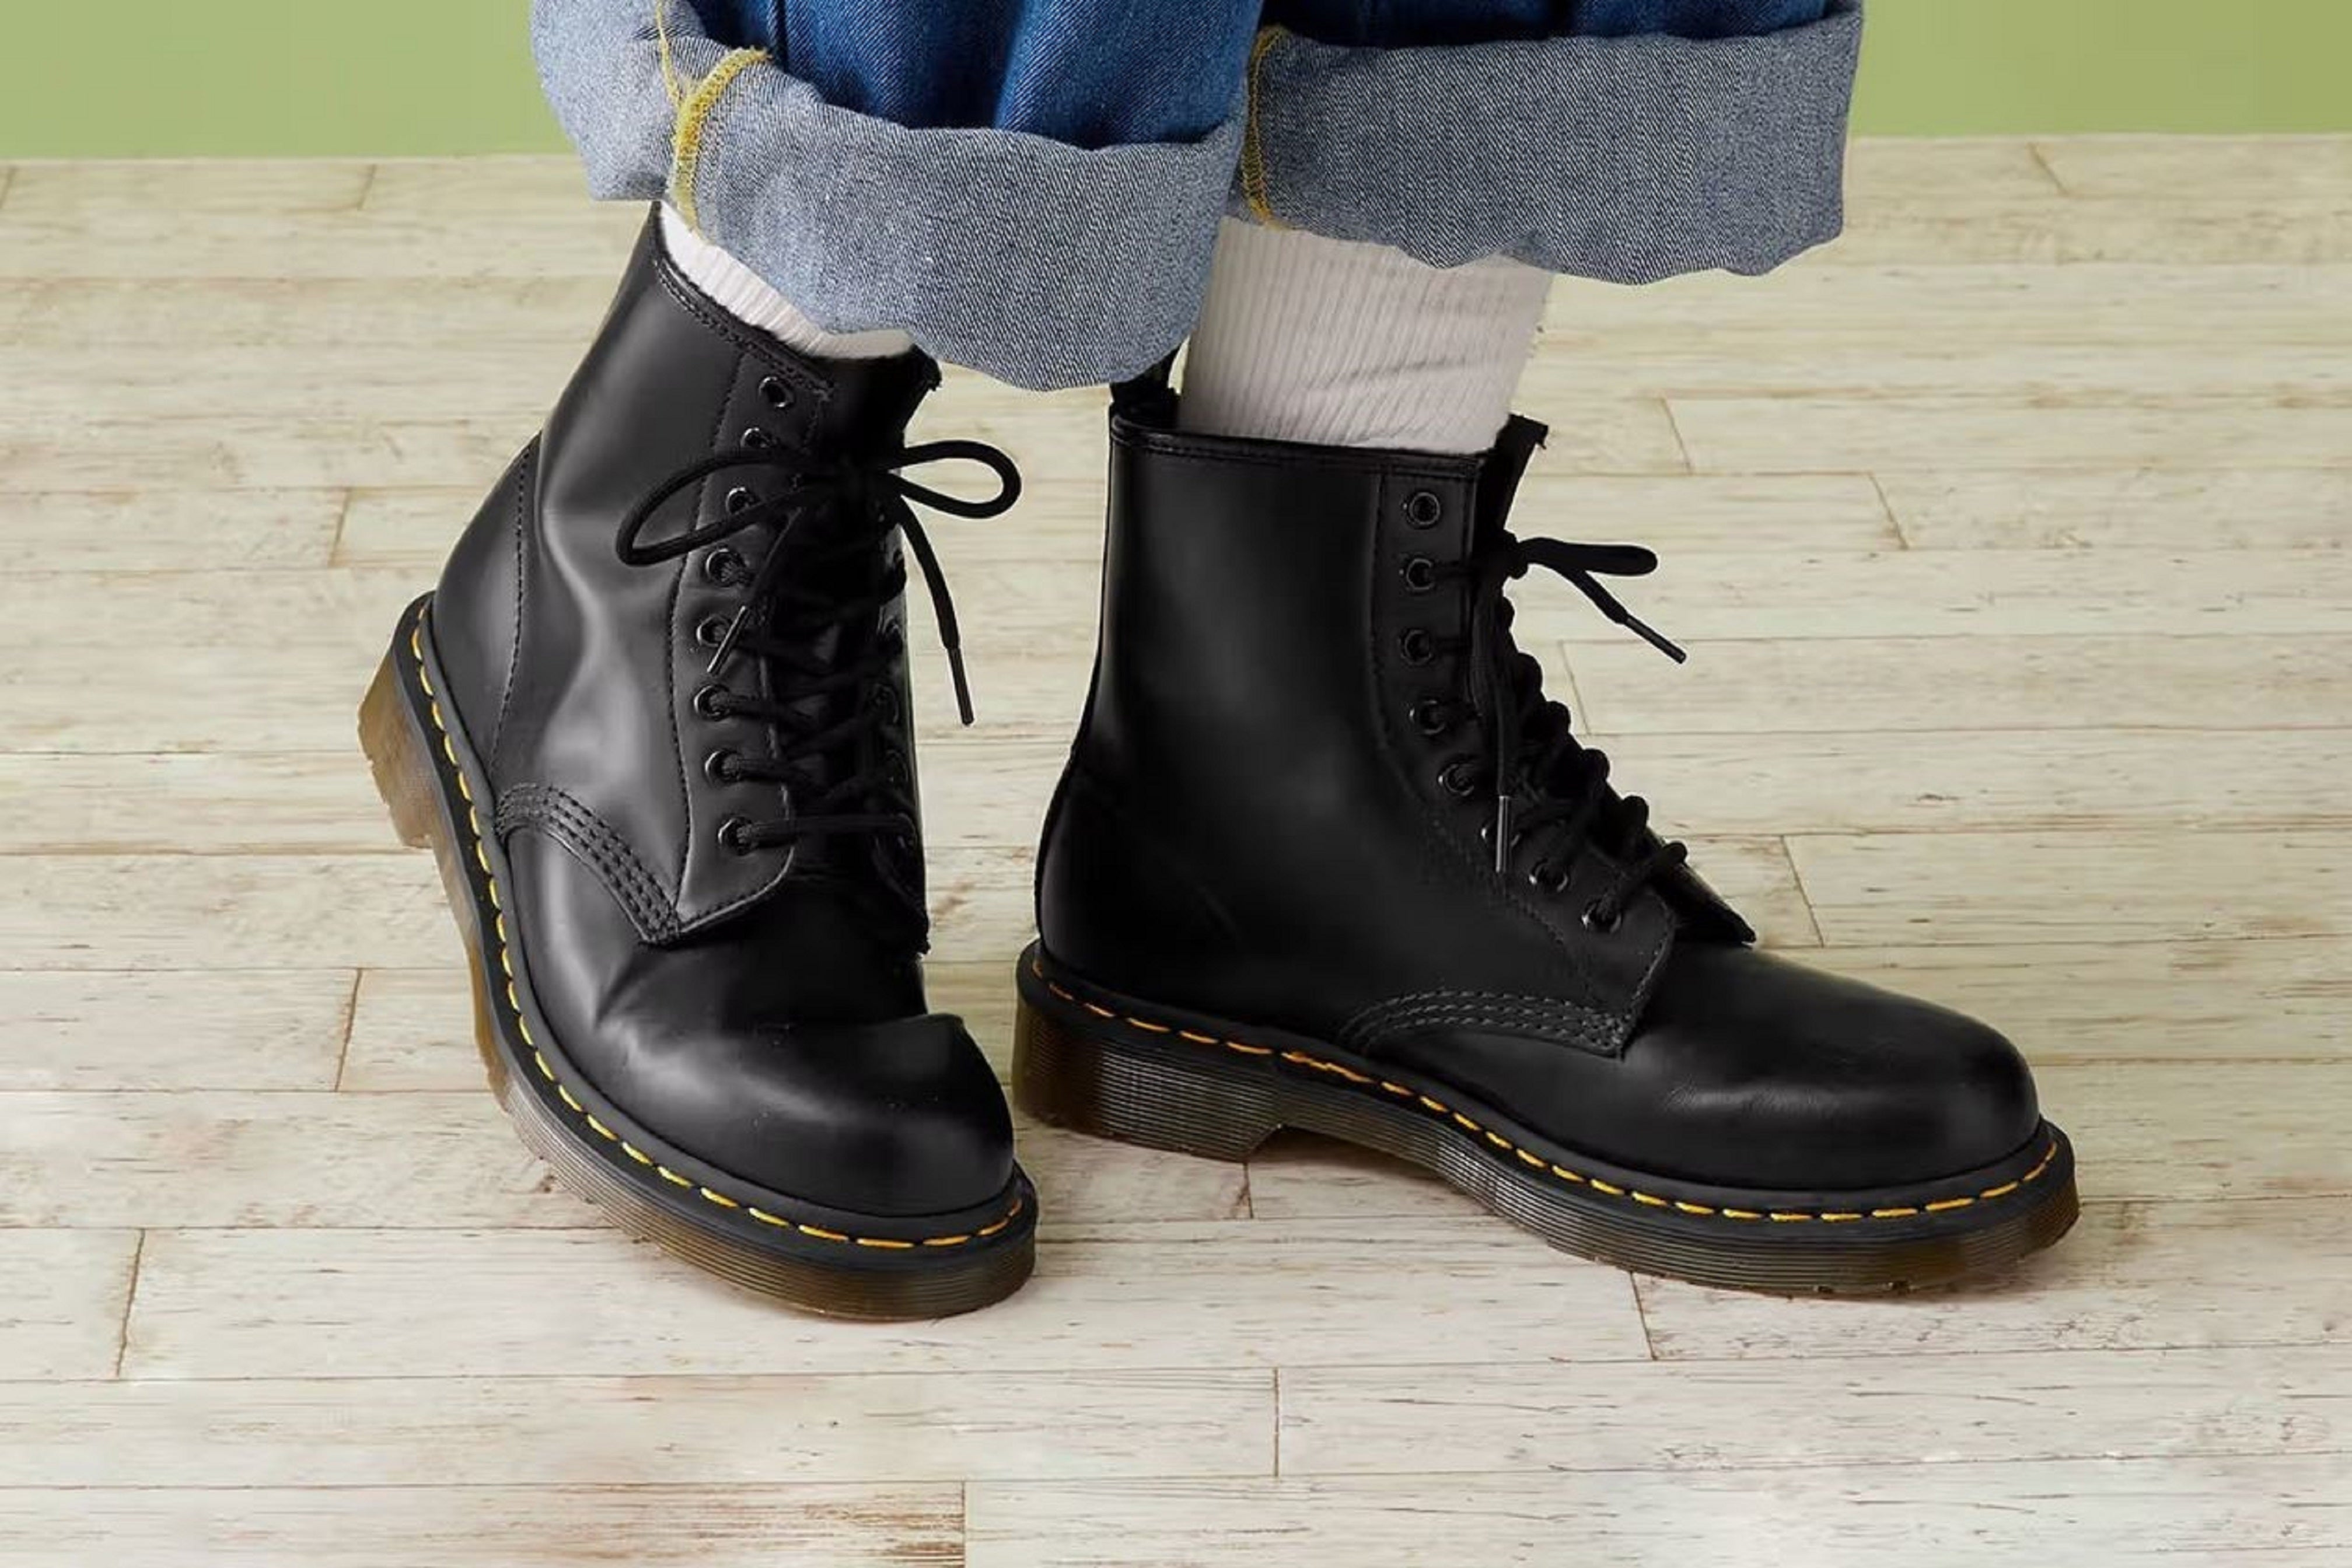 1460 Boots Dr. Martens History